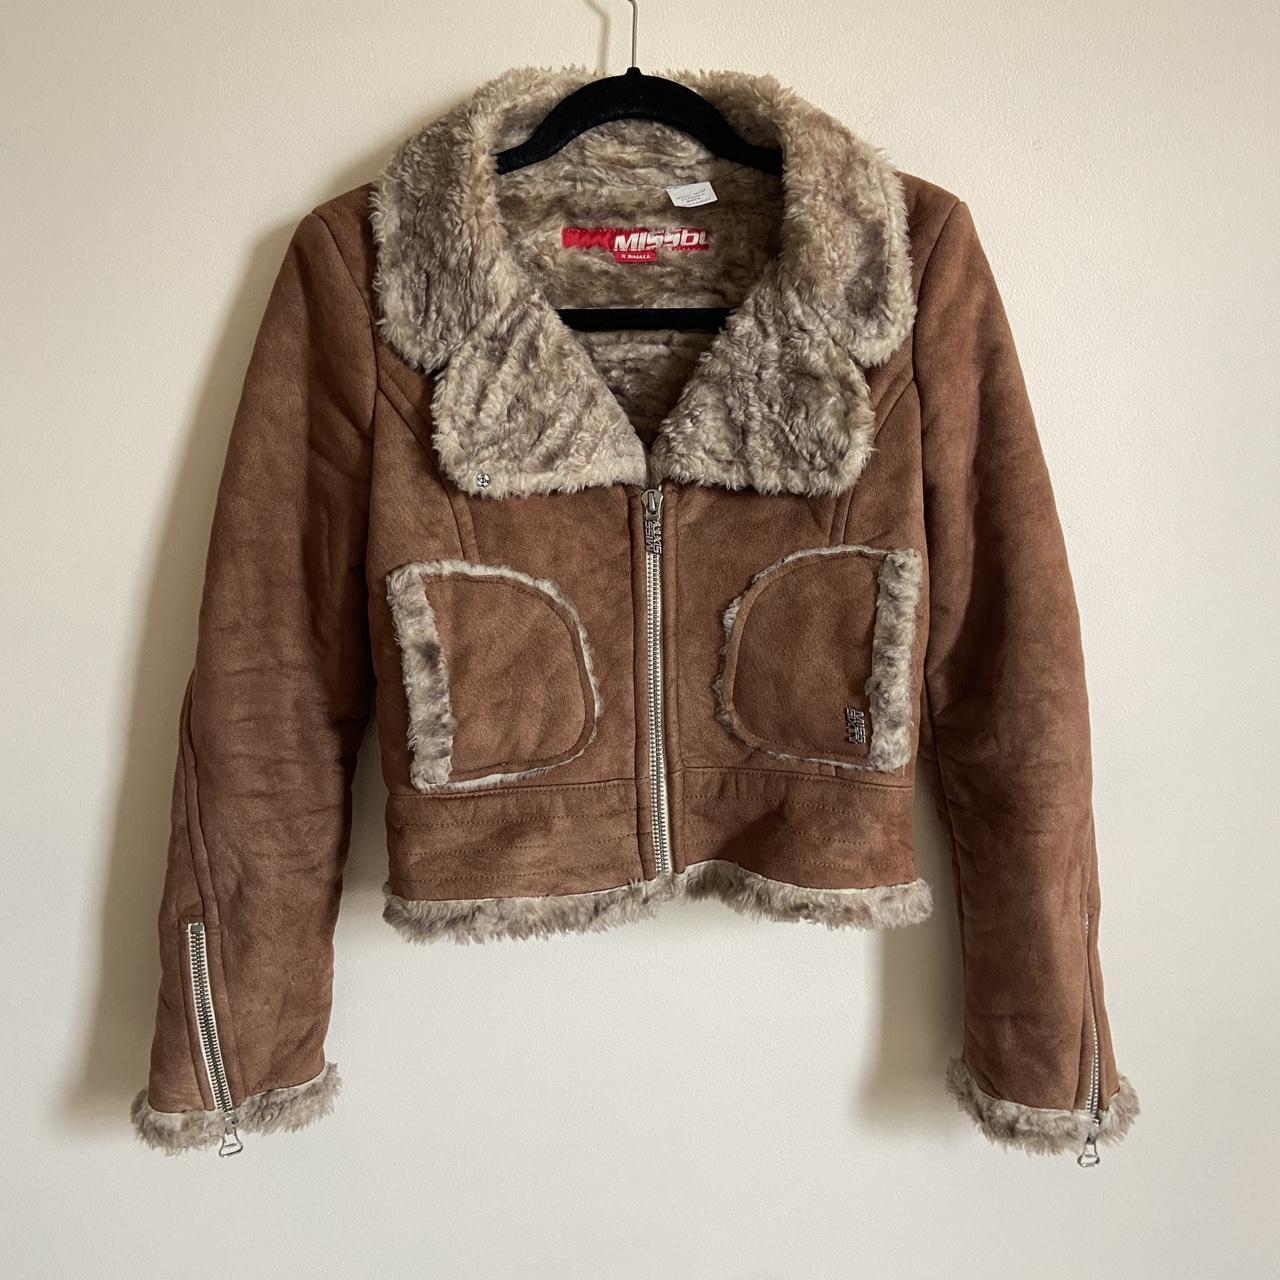 Miss Sixty Women's Brown and Tan Jacket | Depop